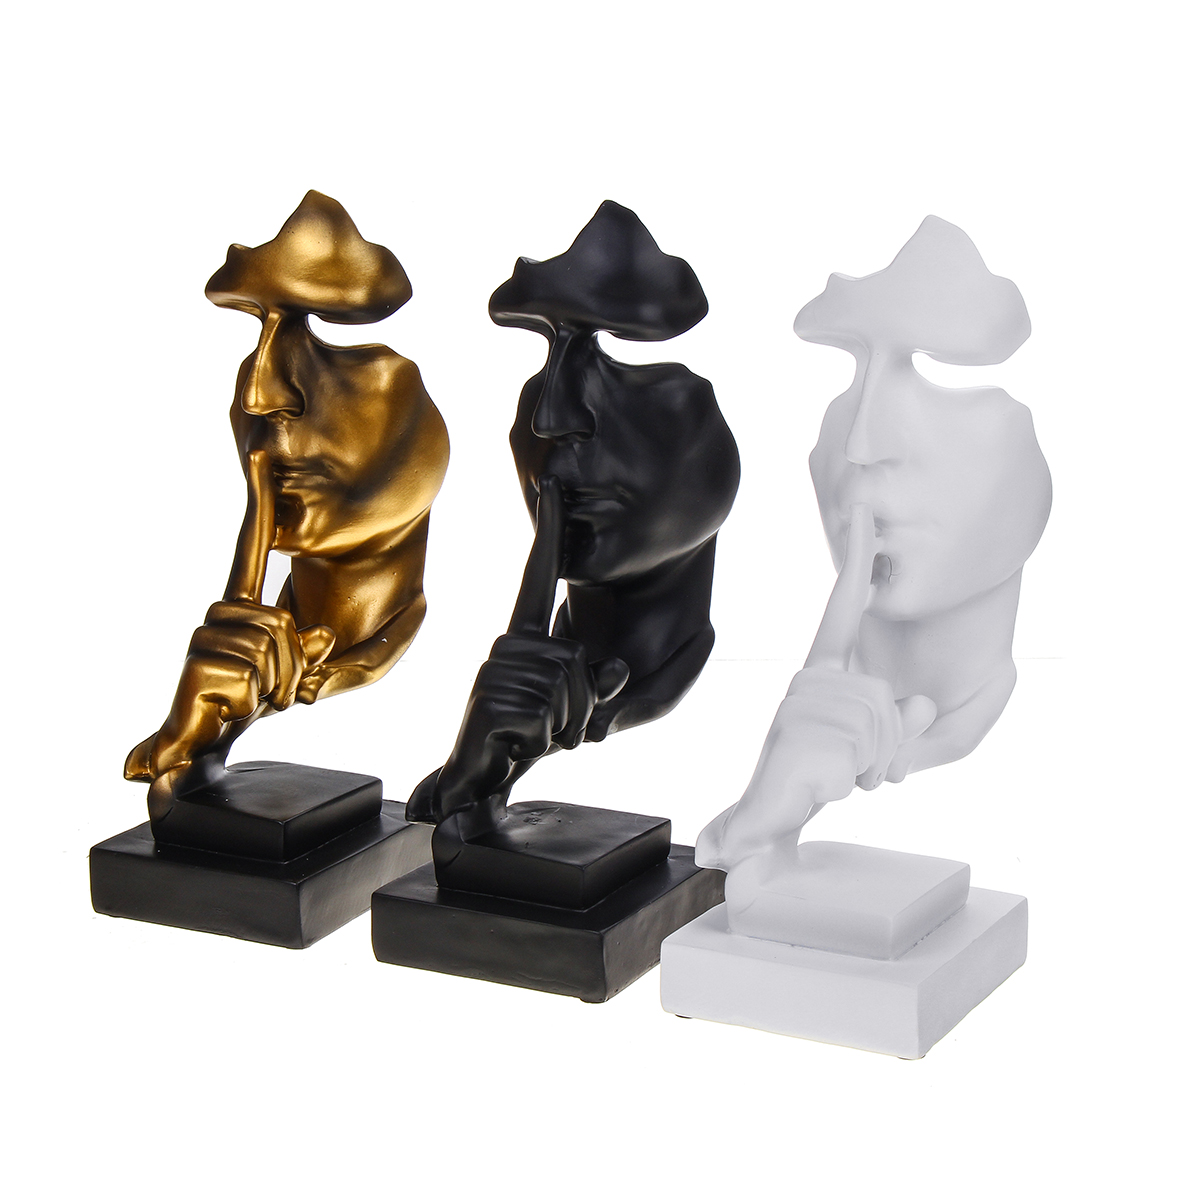 Nordic-Style-Resin-Silent-Decoration-Statues-Gold-Silence-Sculptures-Home-Decorations-1537442-2